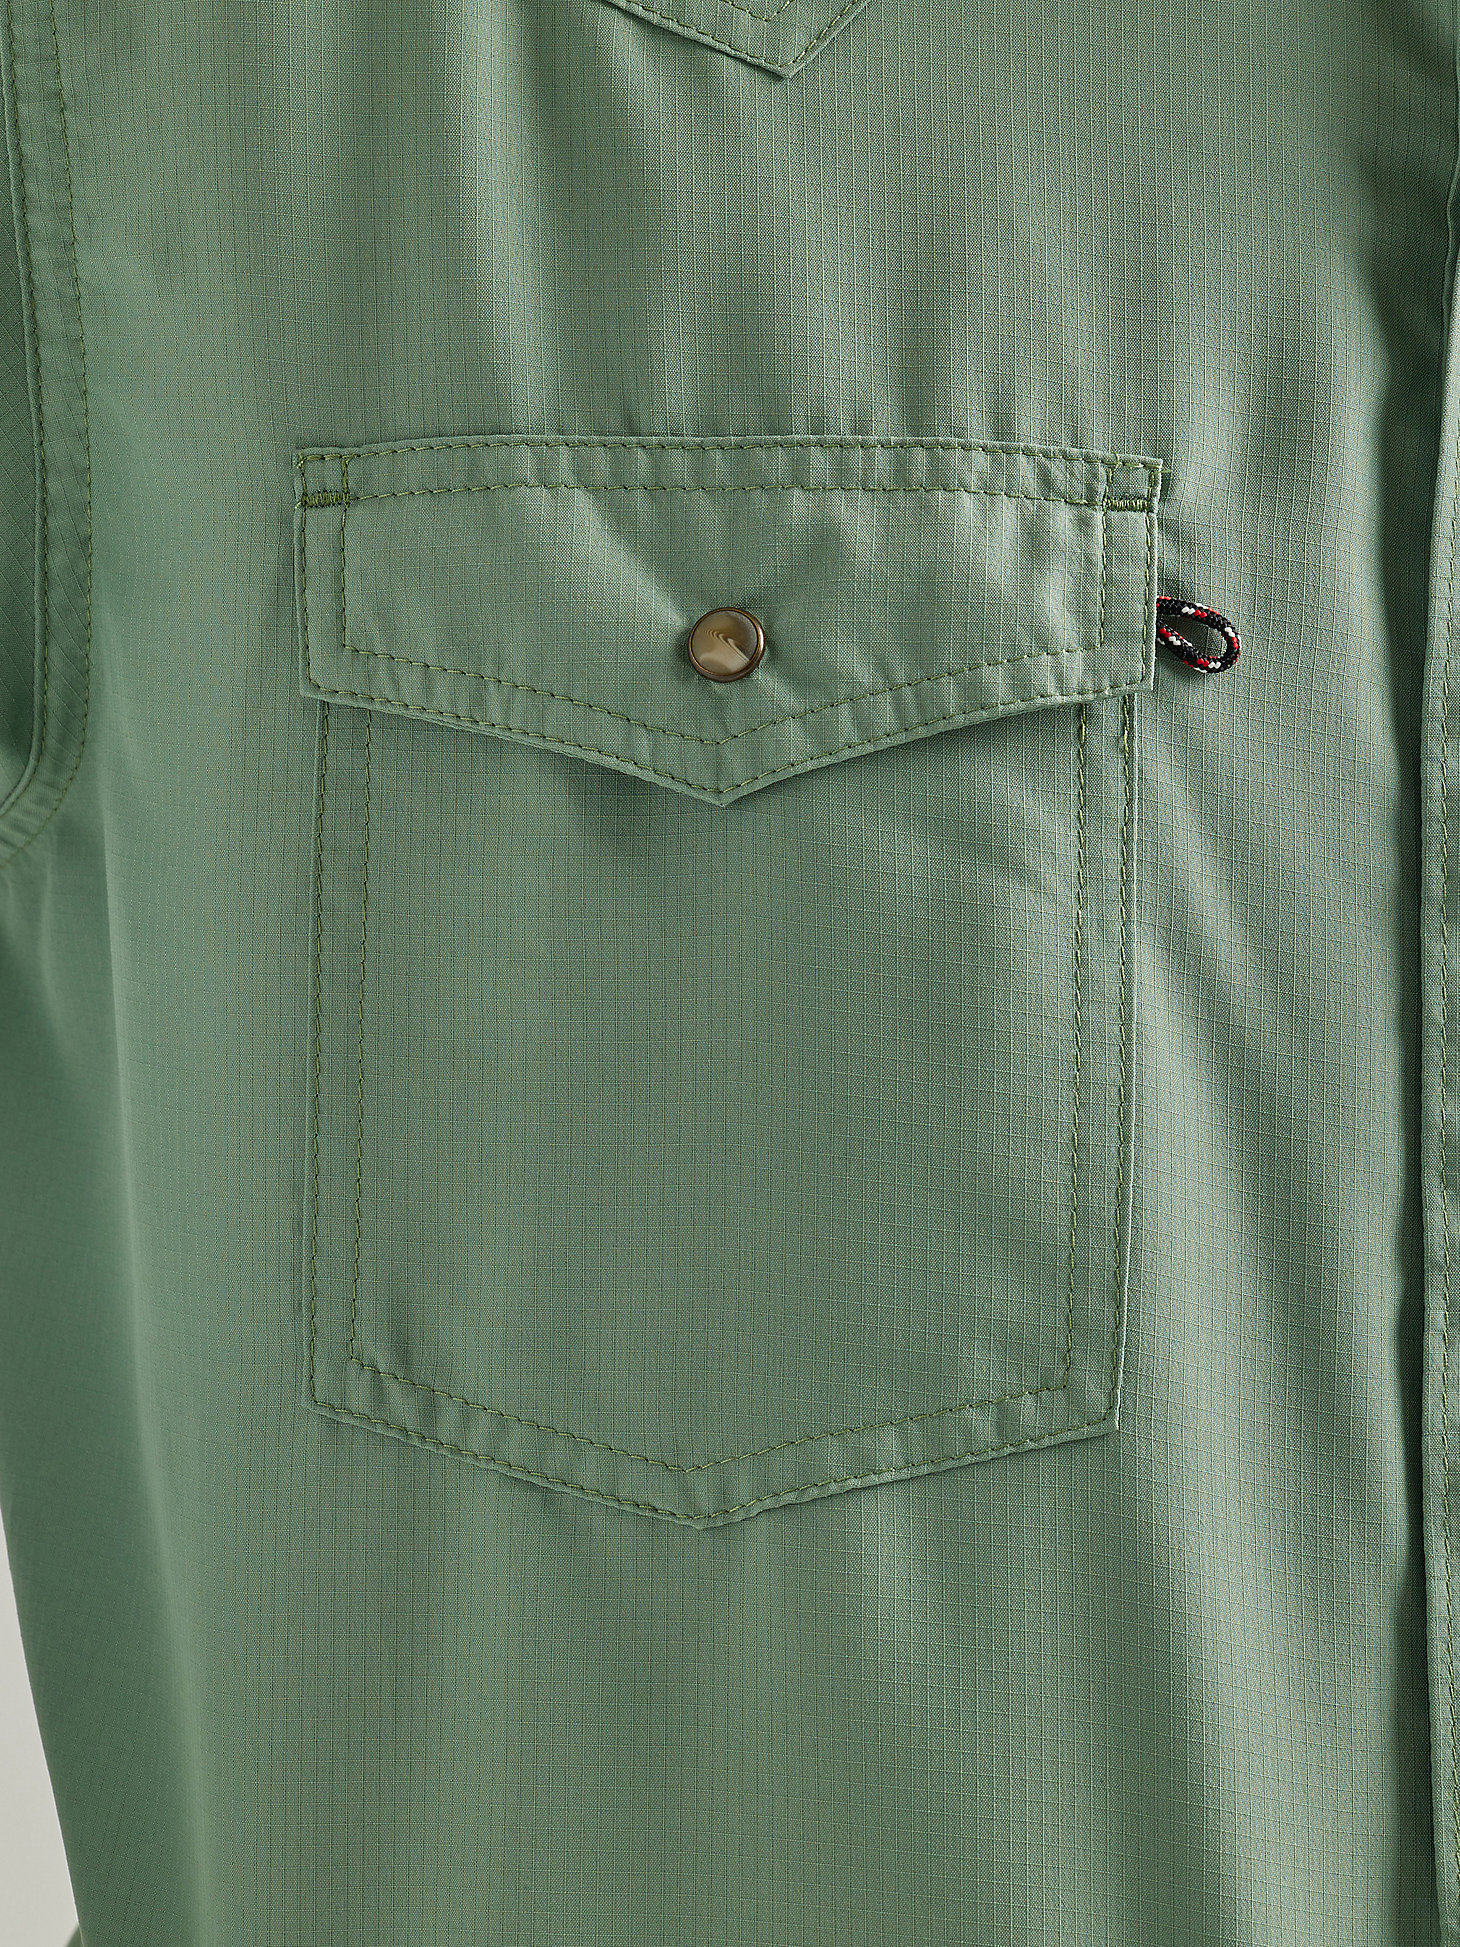 Men's Wrangler Performance Snap Long Sleeve Solid Shirt in Hedge Green alternative view 3